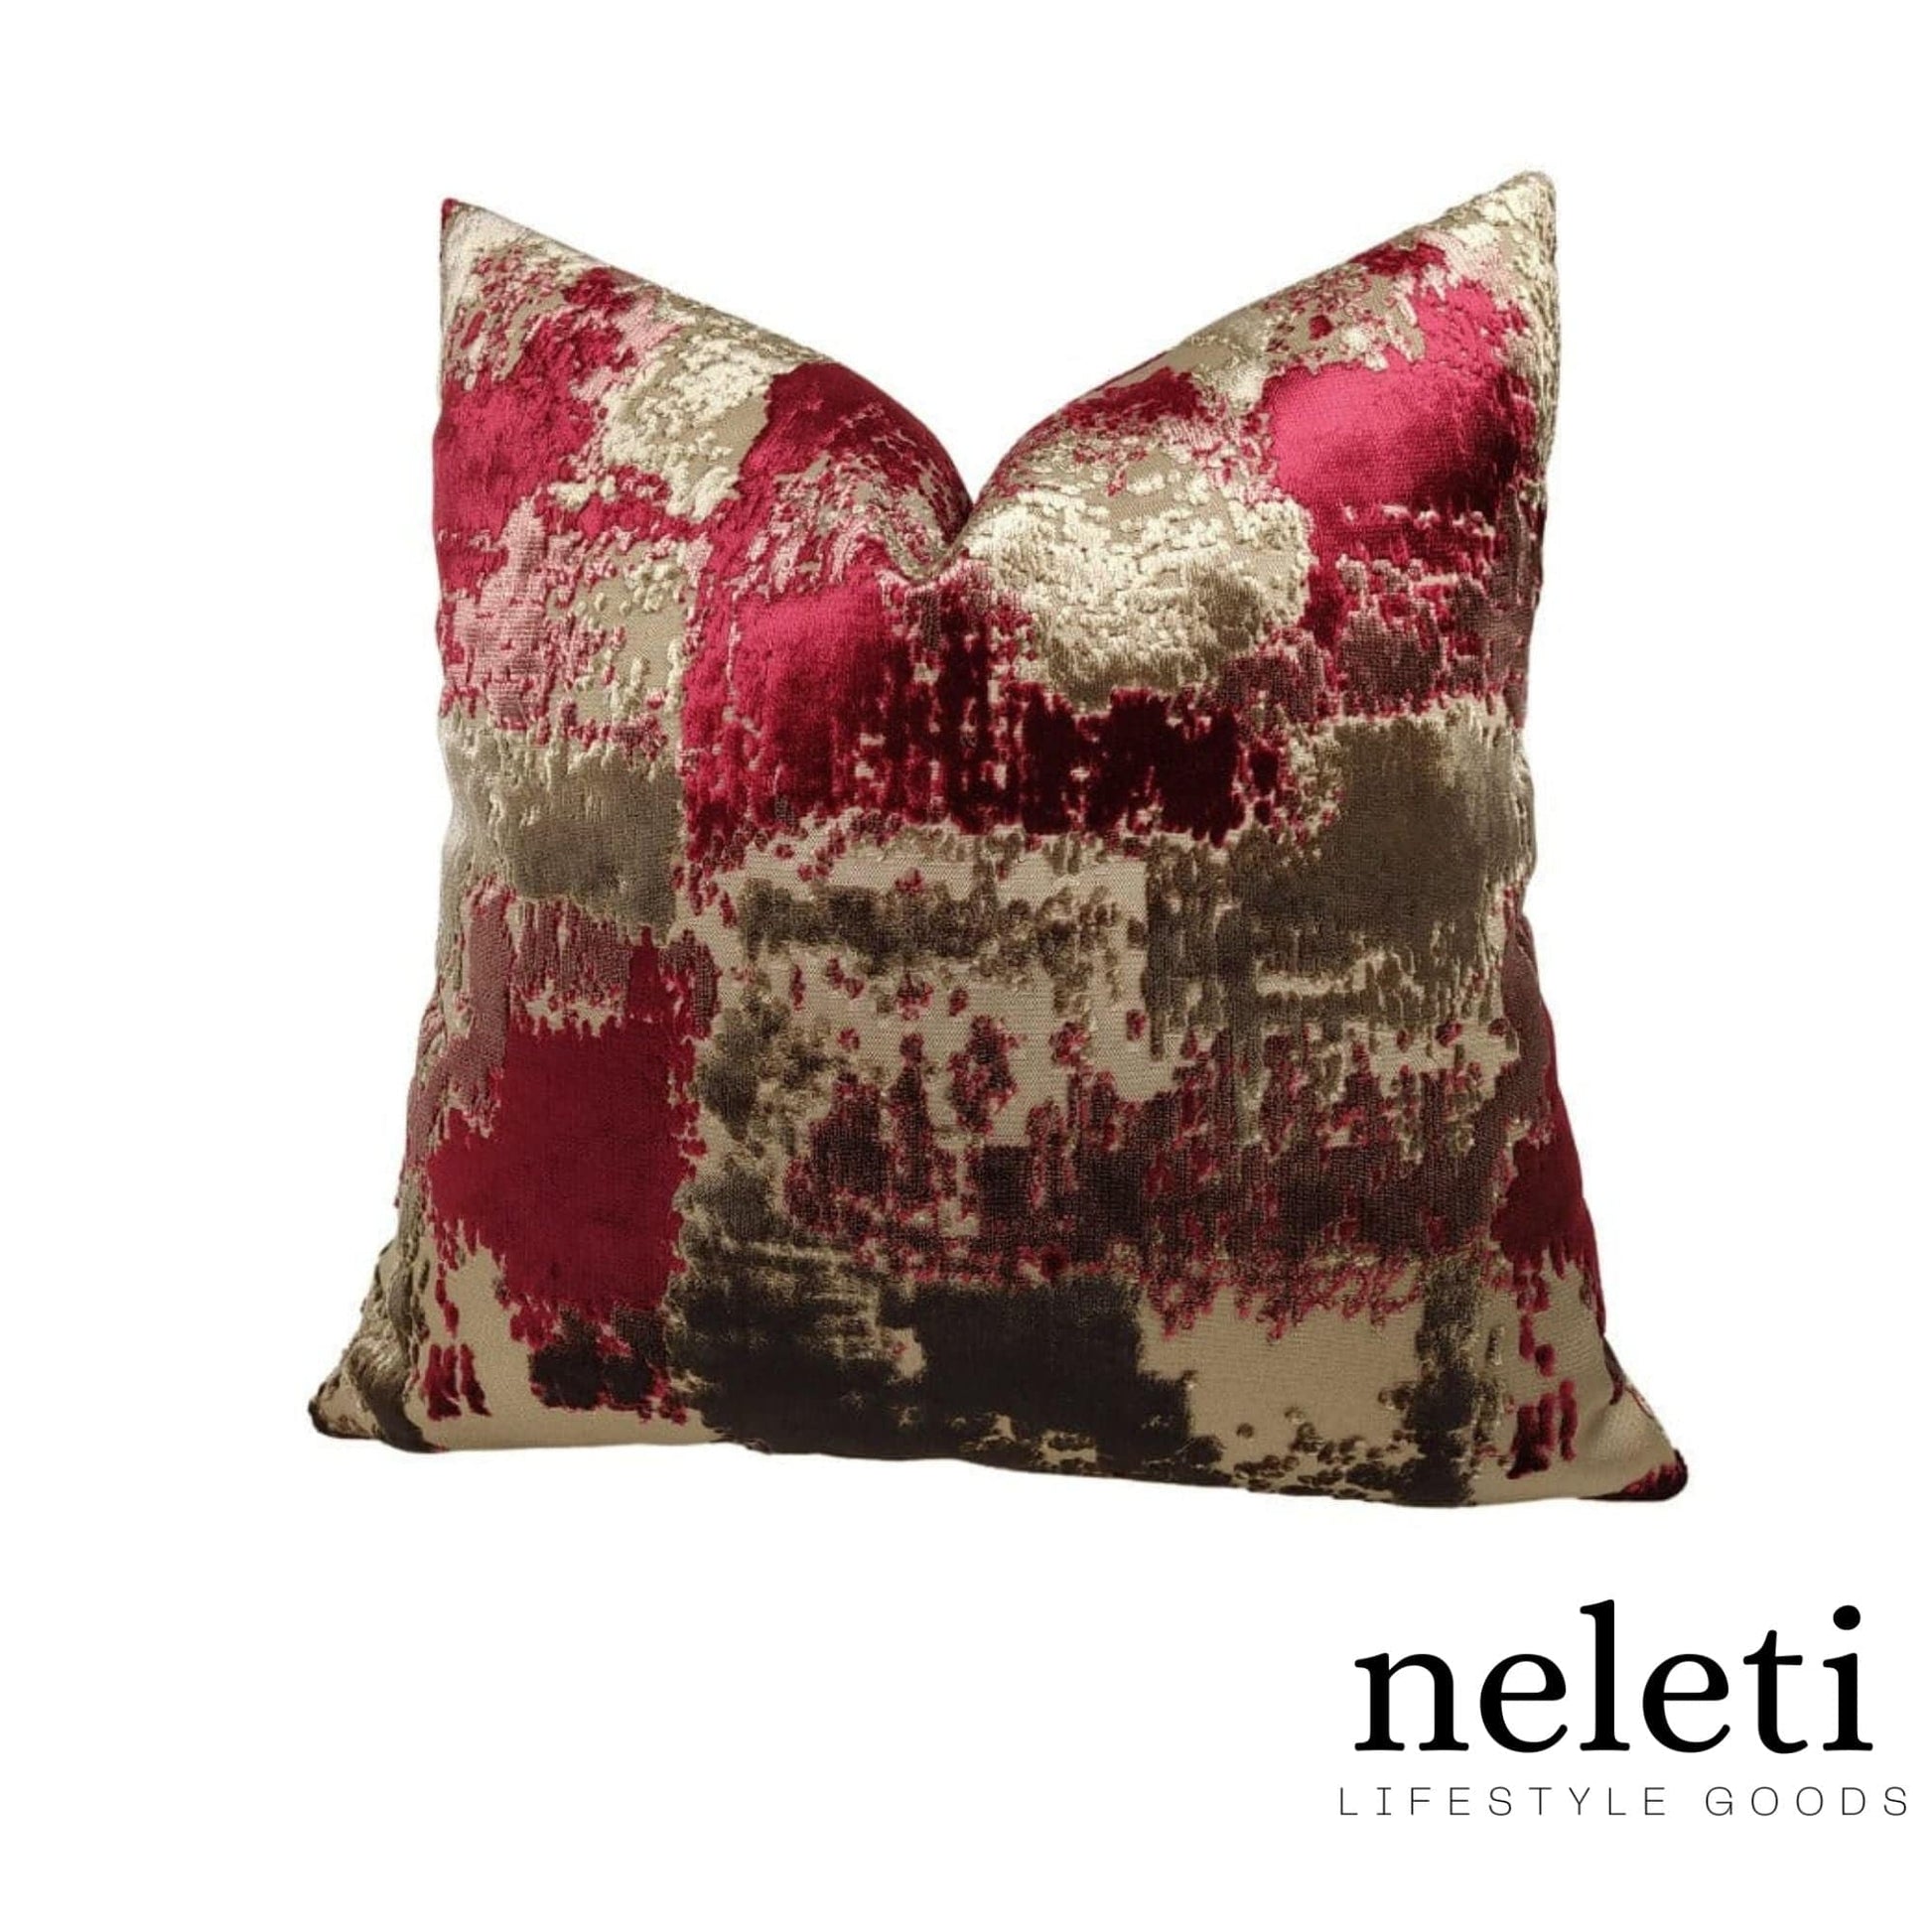 neleti.com-red-gold-accent-pillow-cover